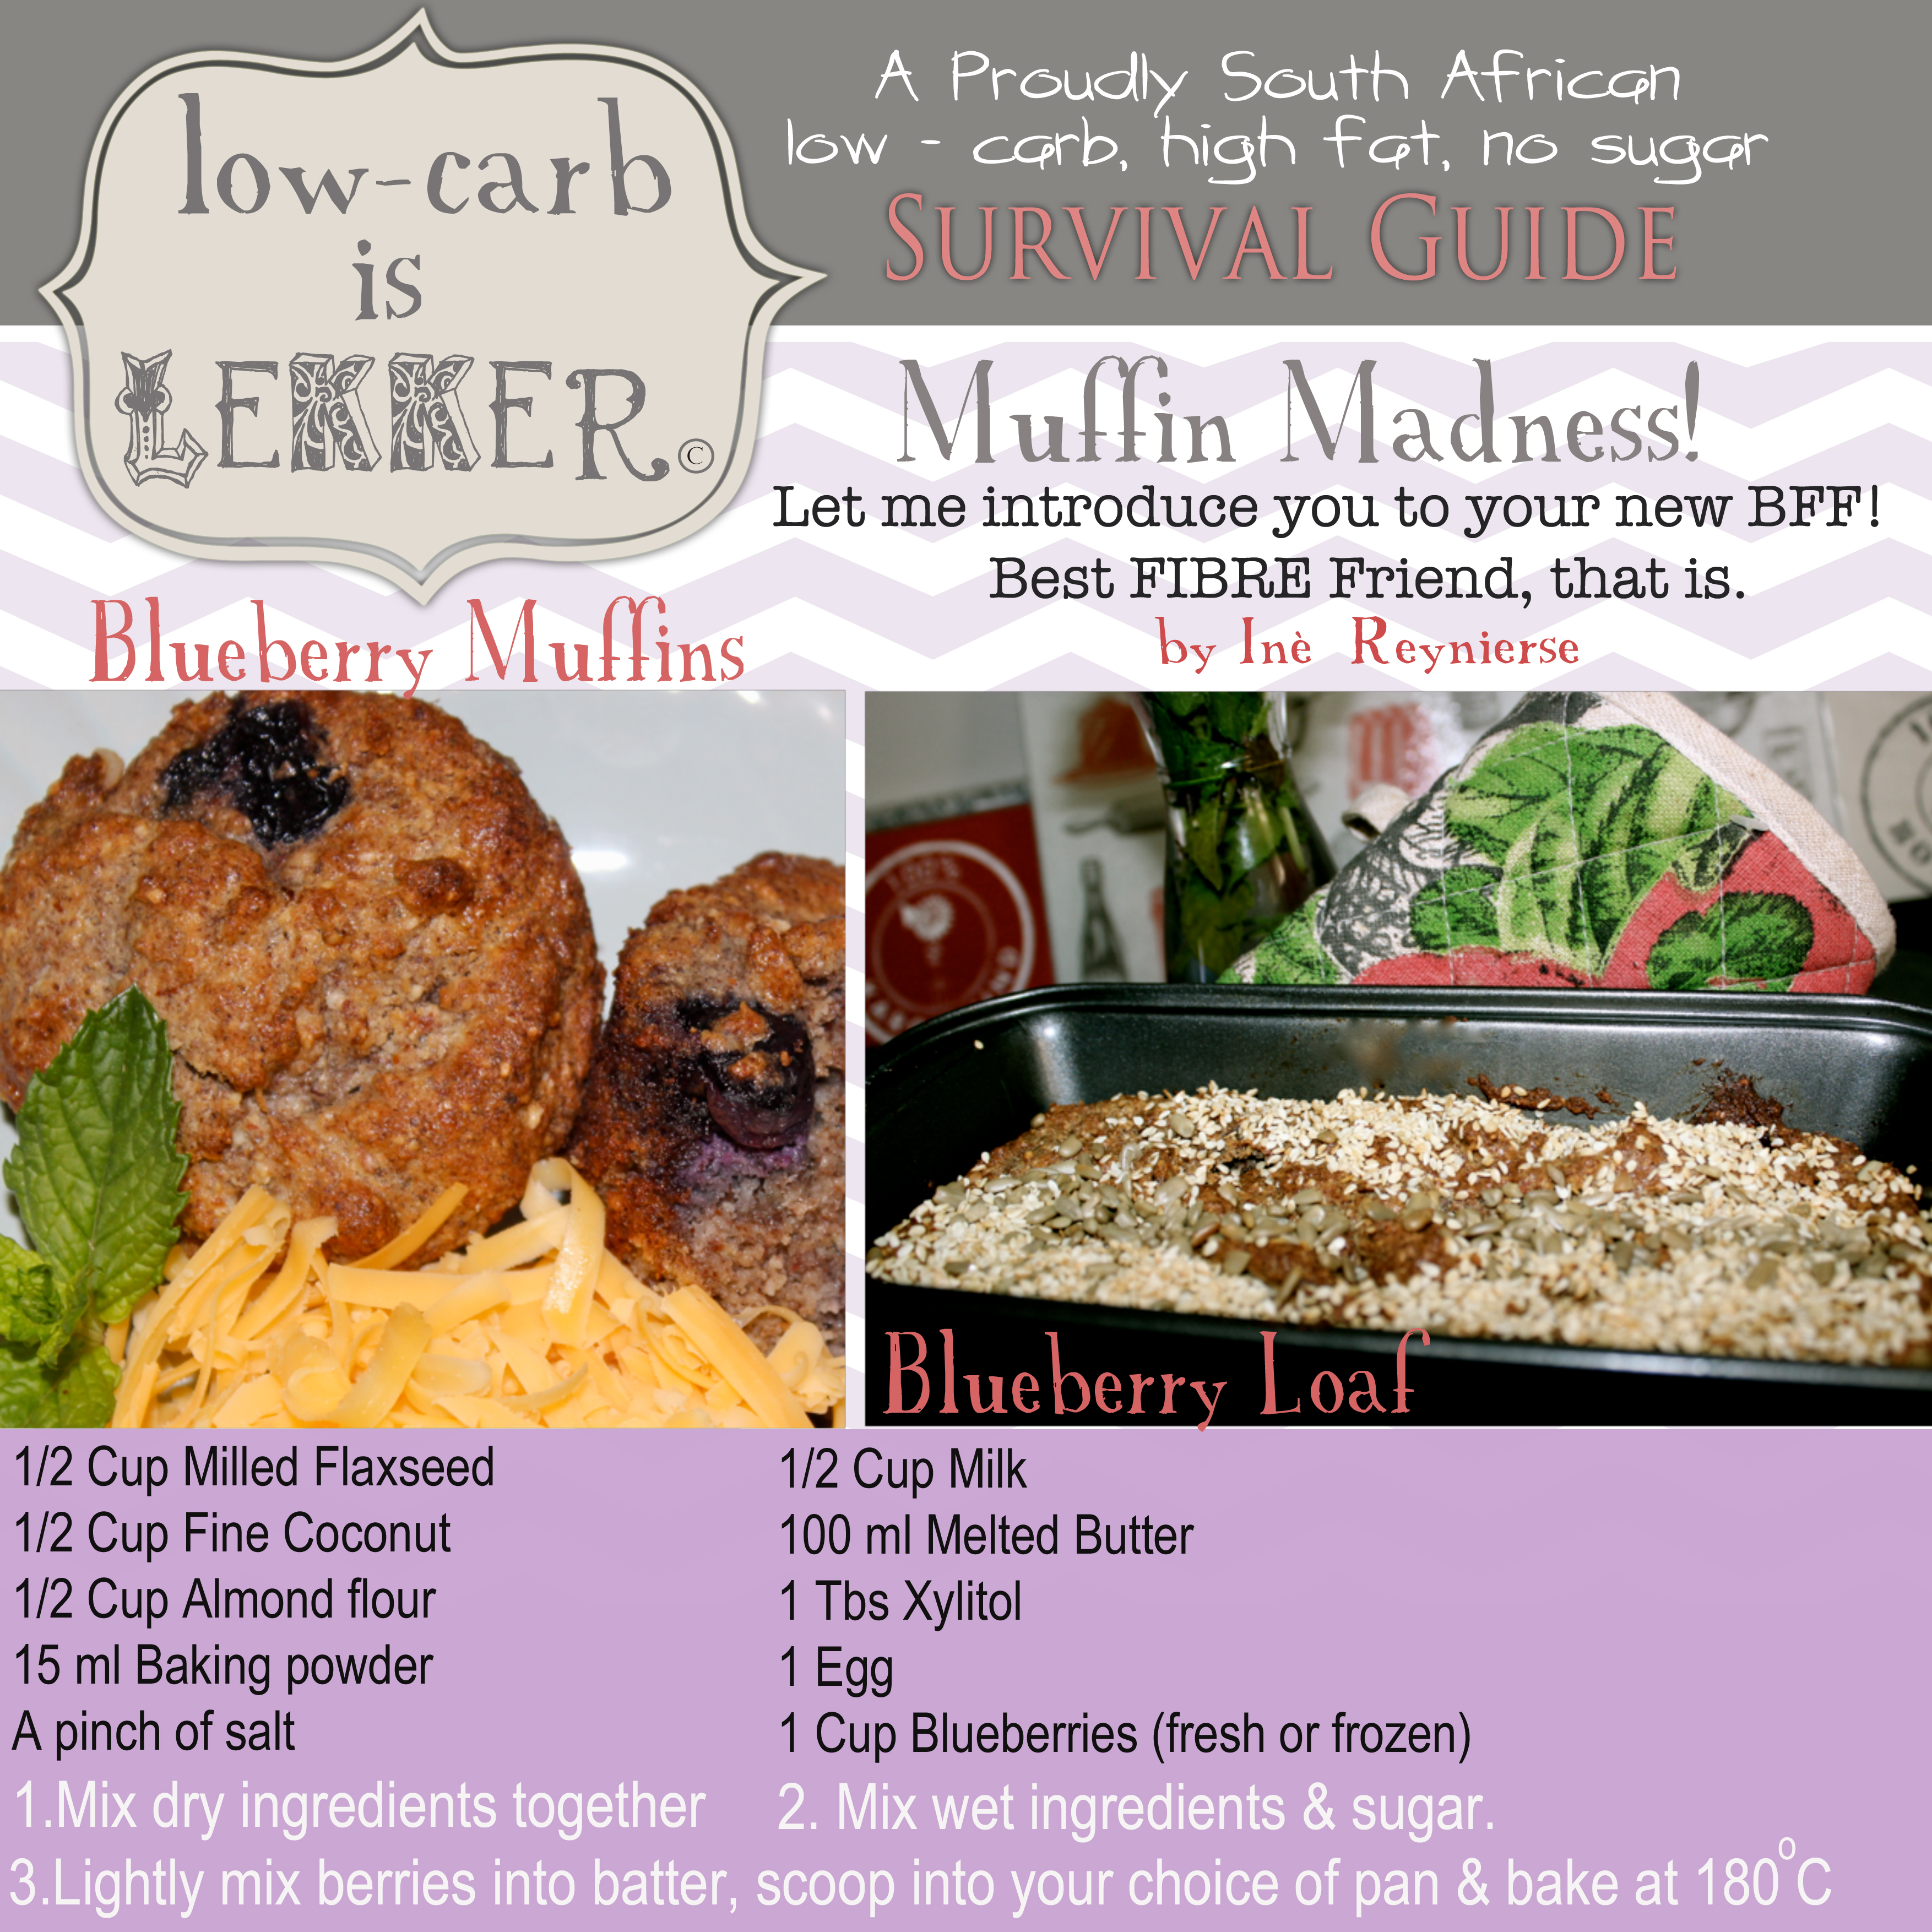 Banting Meal Plan  Low  carb is lekker. A Proudly South African Low carb, High fat, Survival Guide